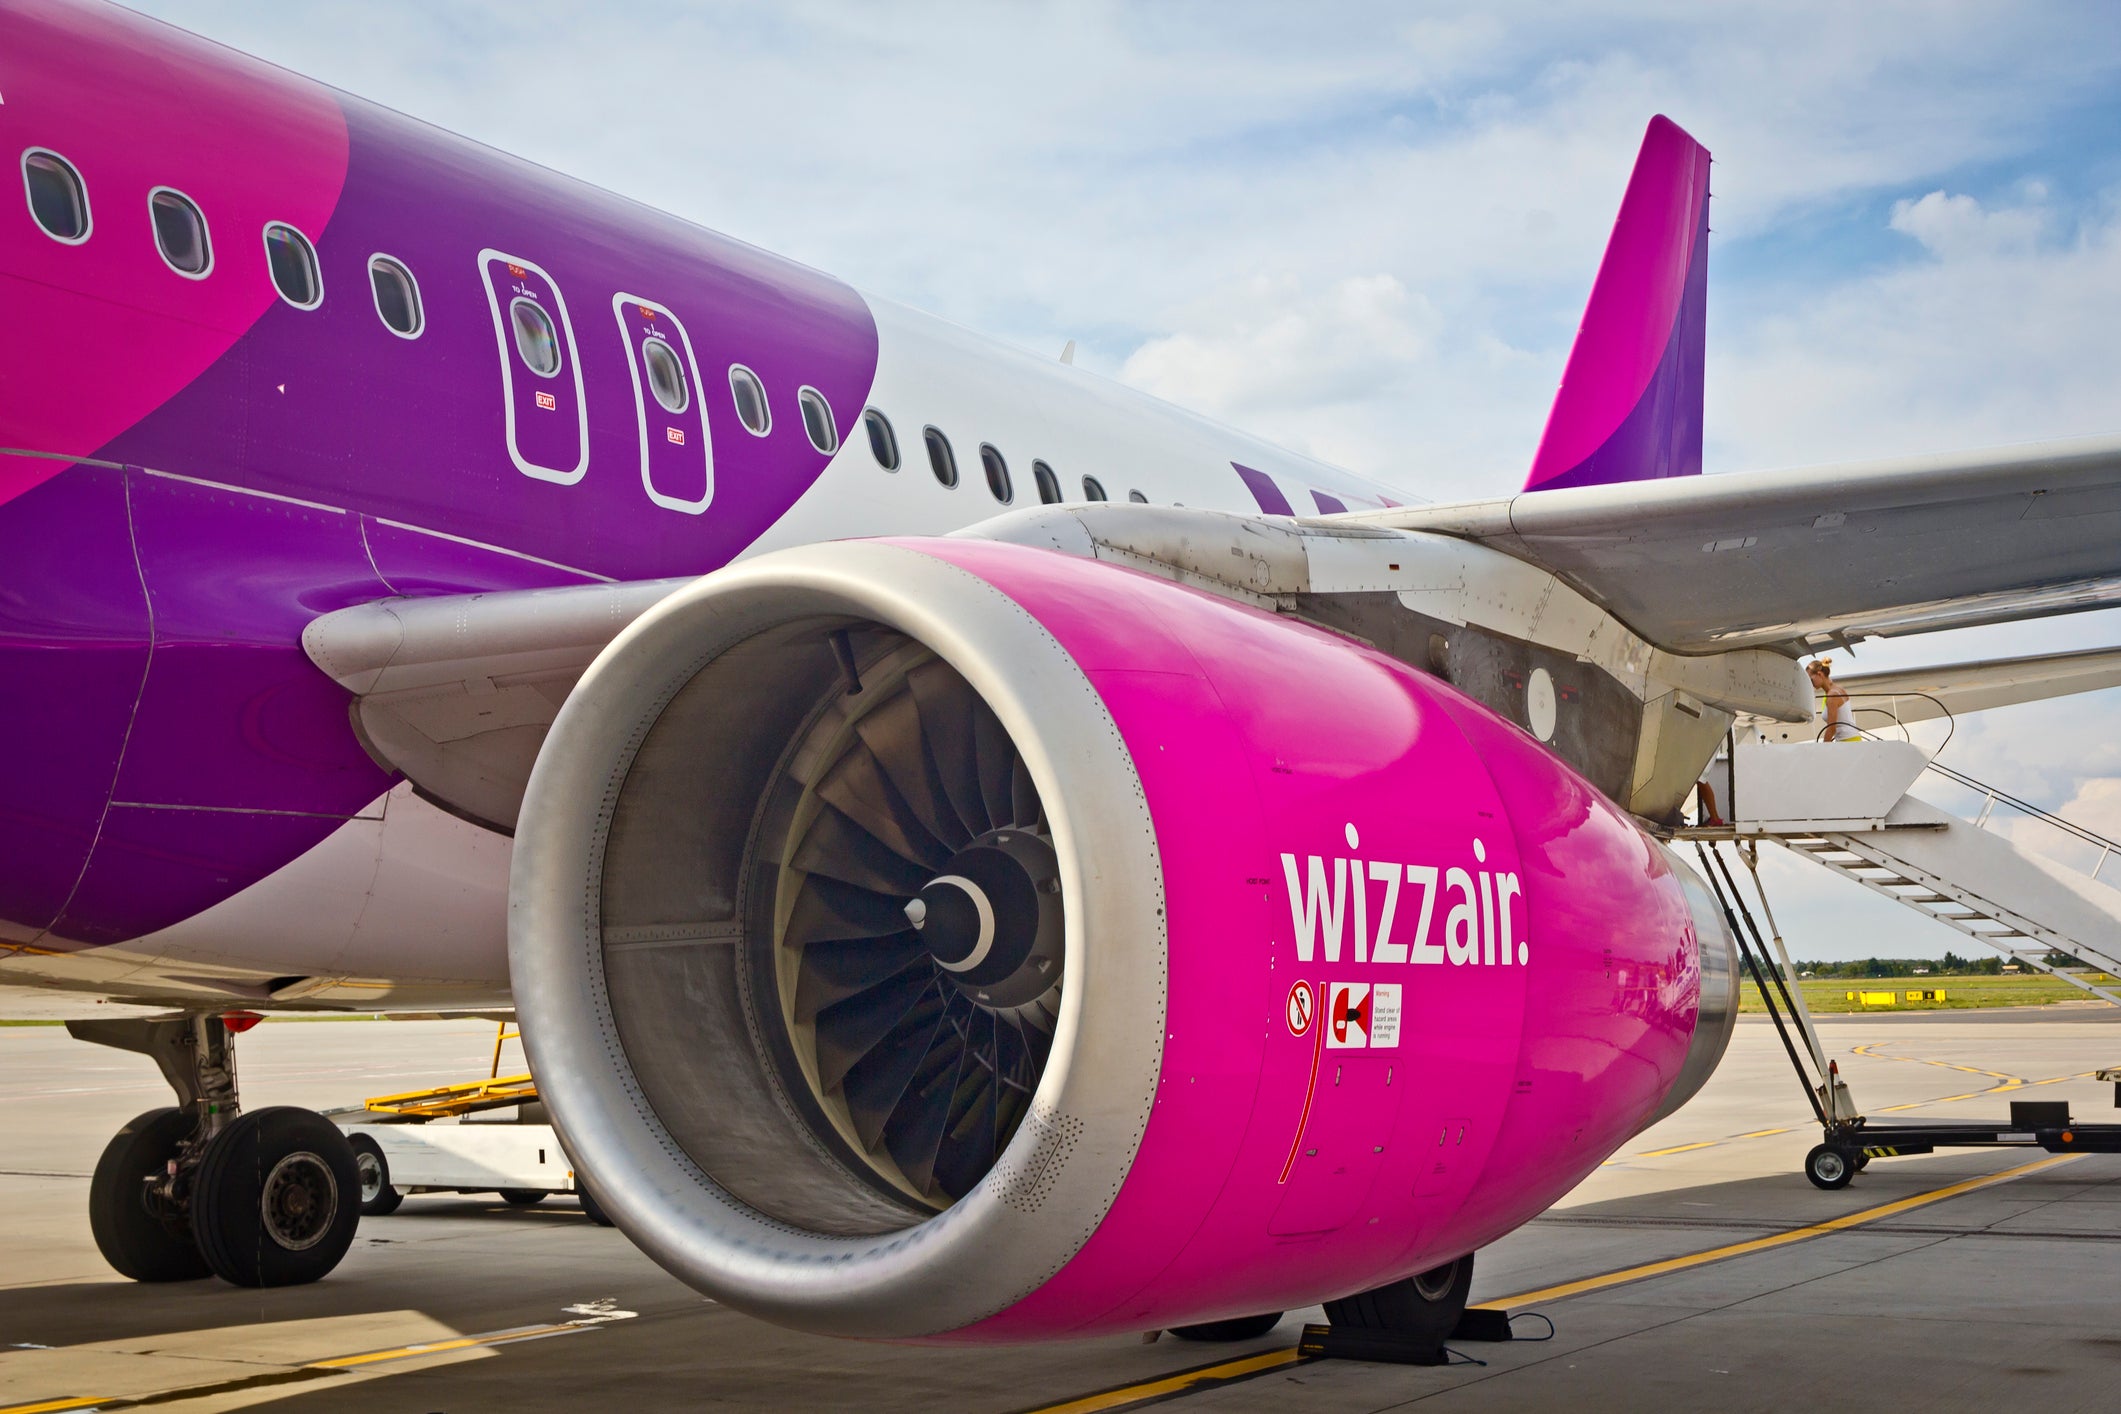 Wizz Air finished bottom in the airline satisfaction survey